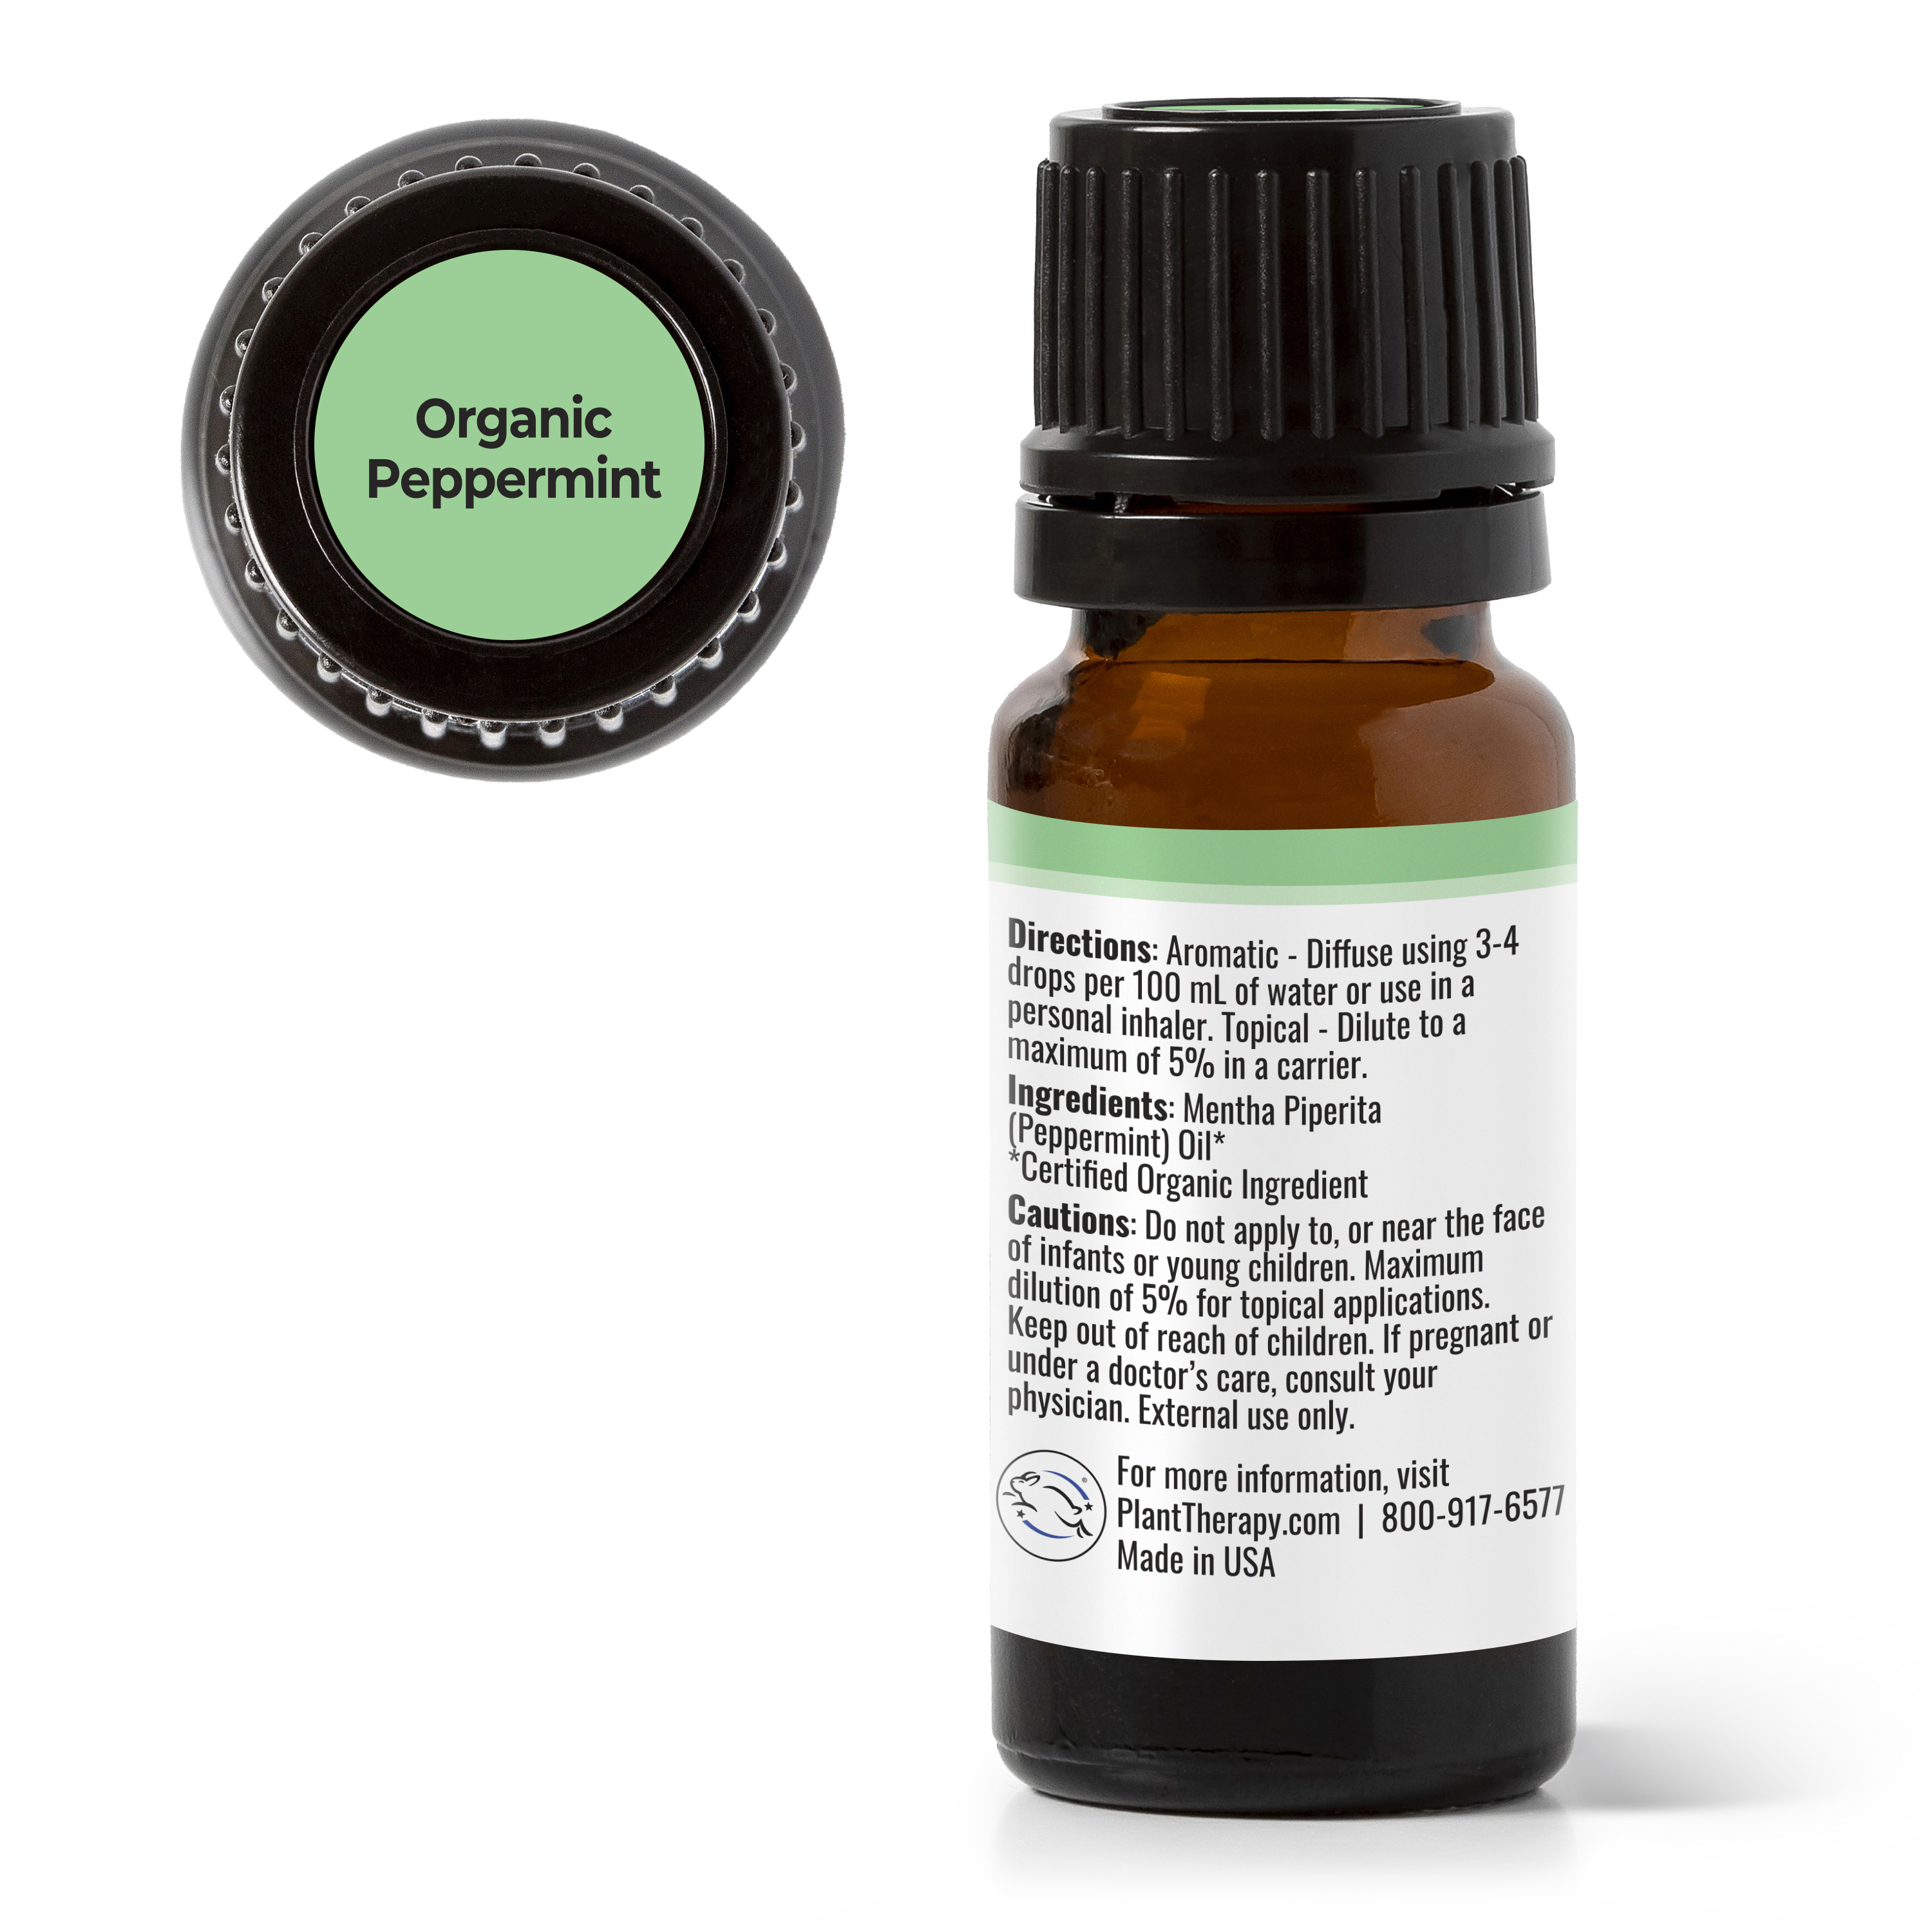 Plant Therapy USDA Organic Peppermint Essential 10 ml (1/3 oz) Oil 100% Pure, Undiluted for Energy & Pain - image 4 of 7